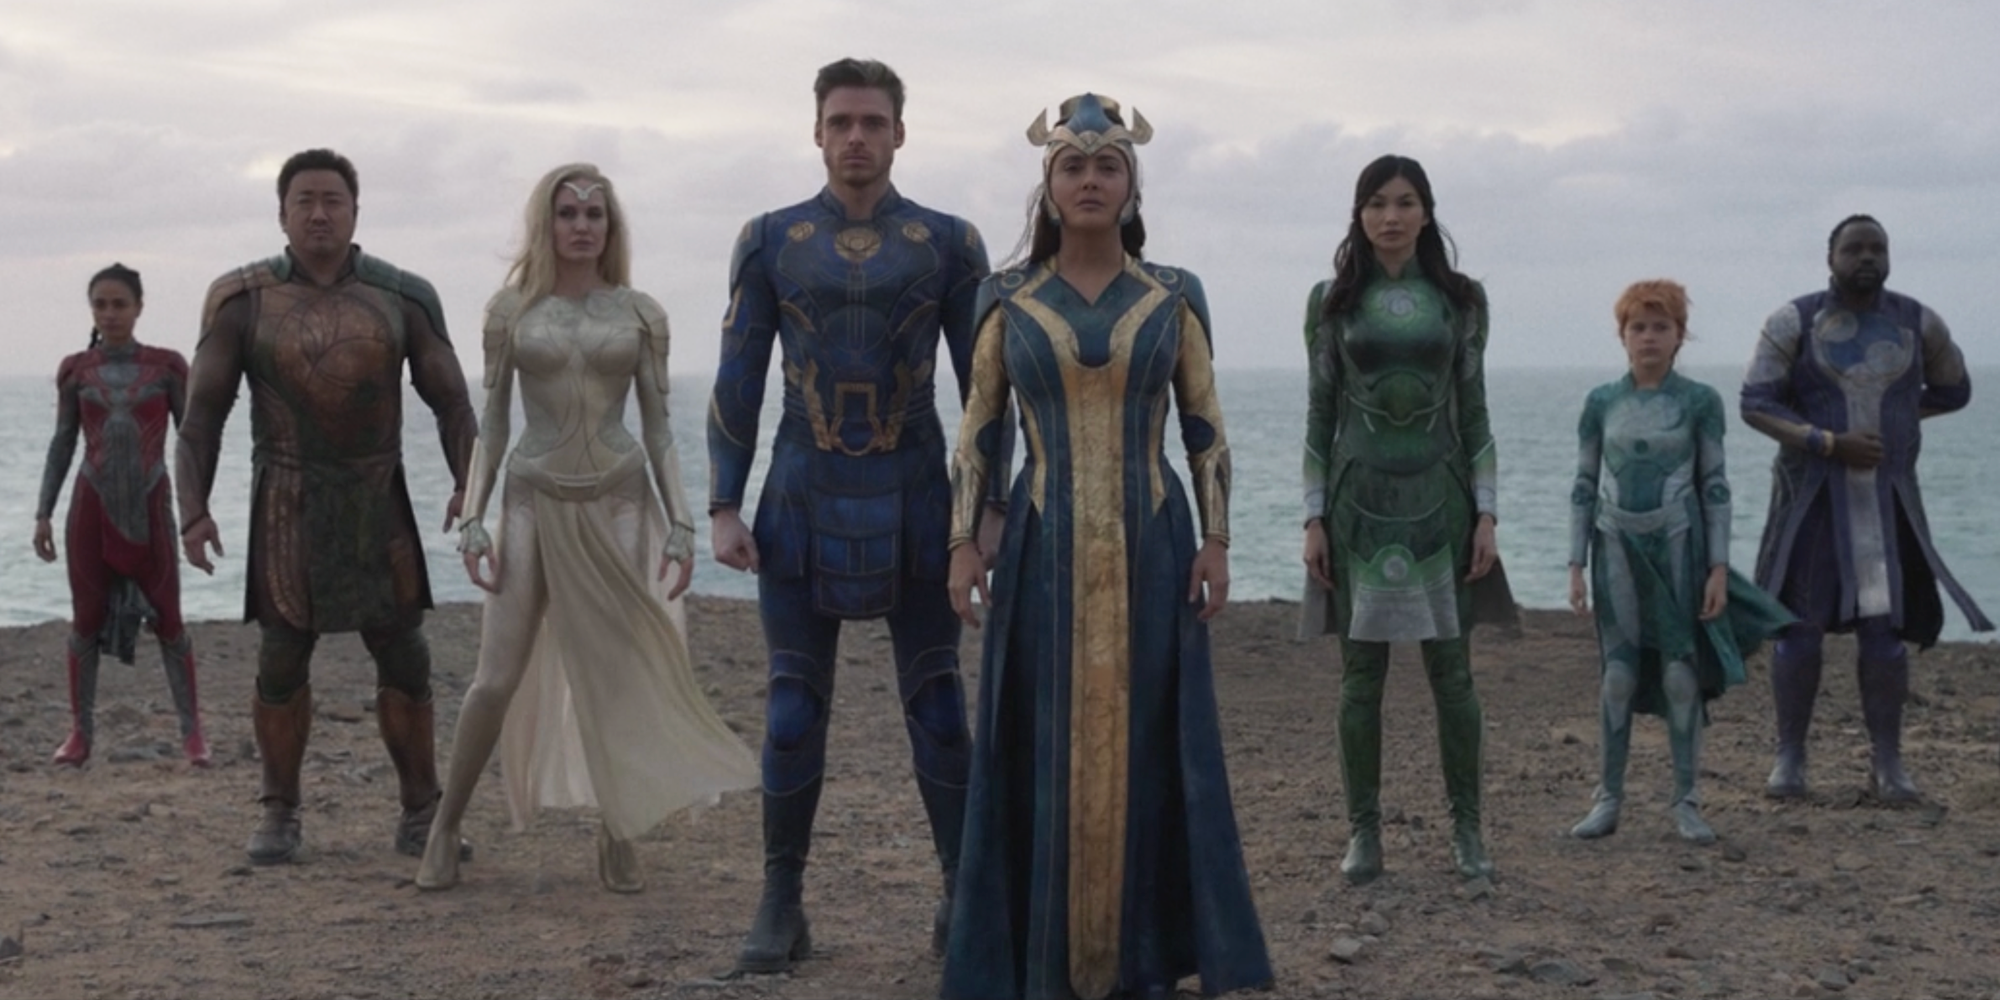 Eternals characters standing together on a beach 